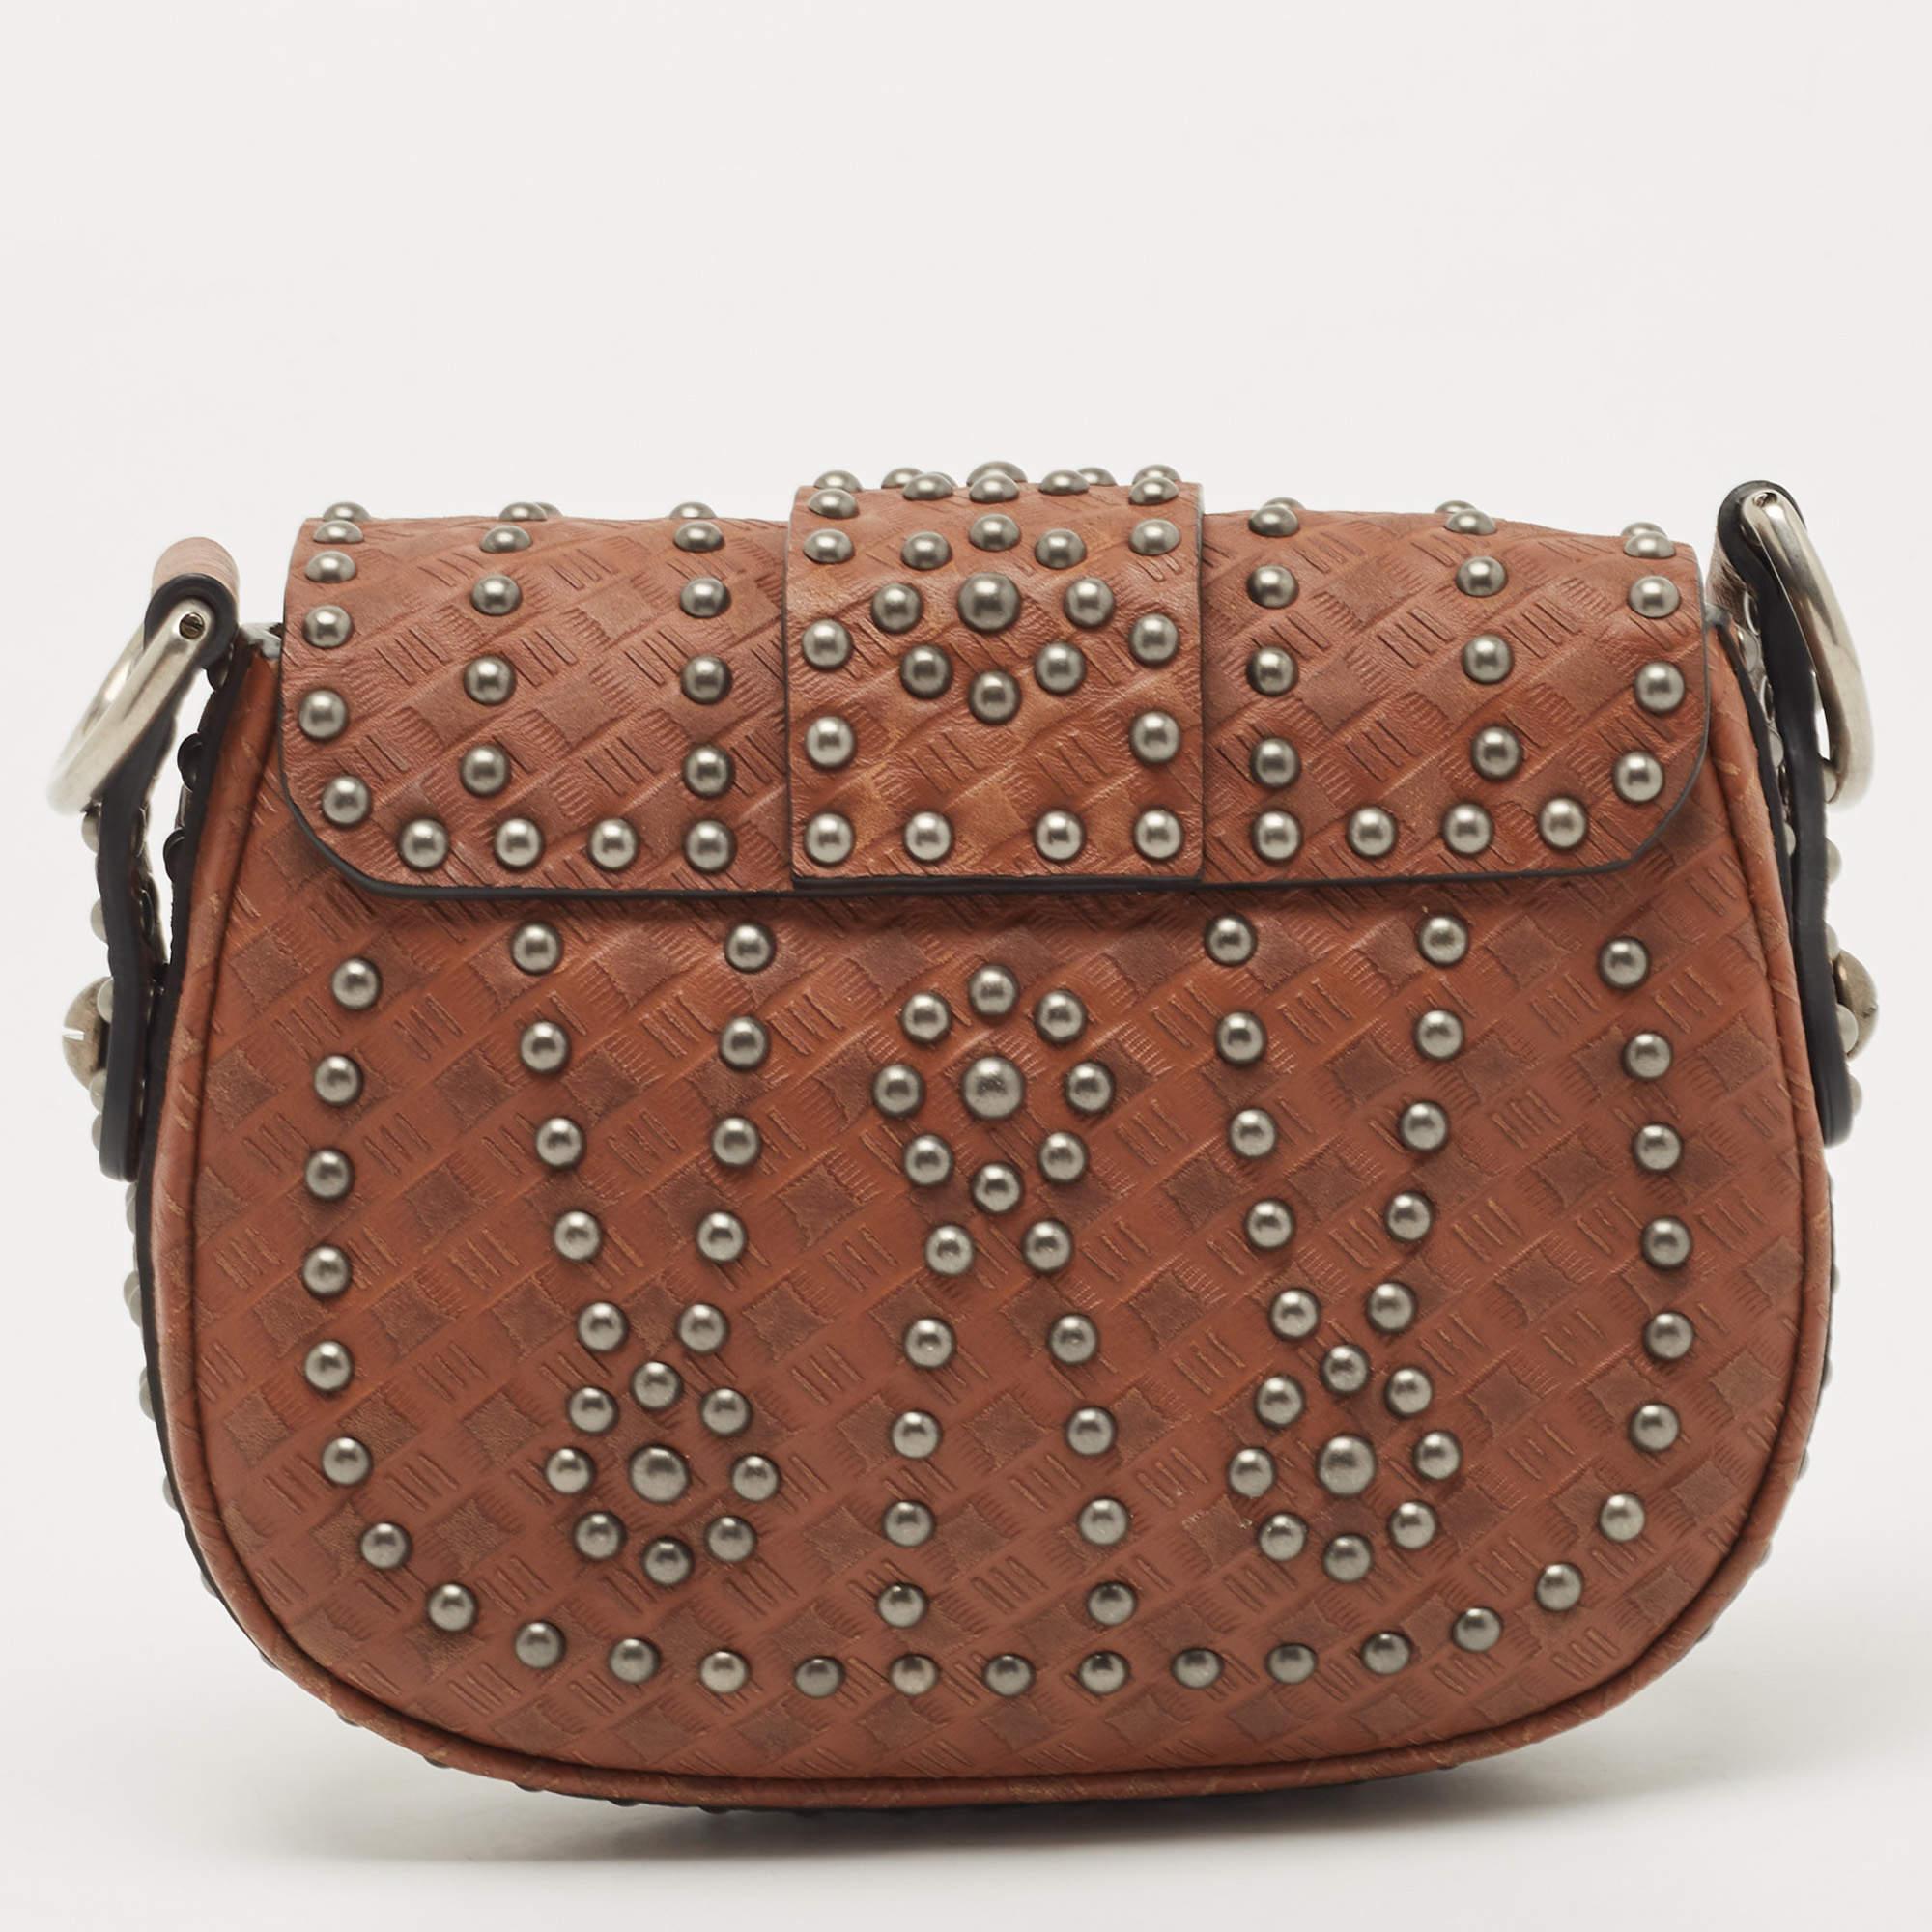 Shaped with rounded edges, this D-Fence from Dior exudes the label's penchant for making creations that are equal parts chic and distinctive. Crafted from brown leather on the exterior, this bag features studs all over, the brand label on the front,